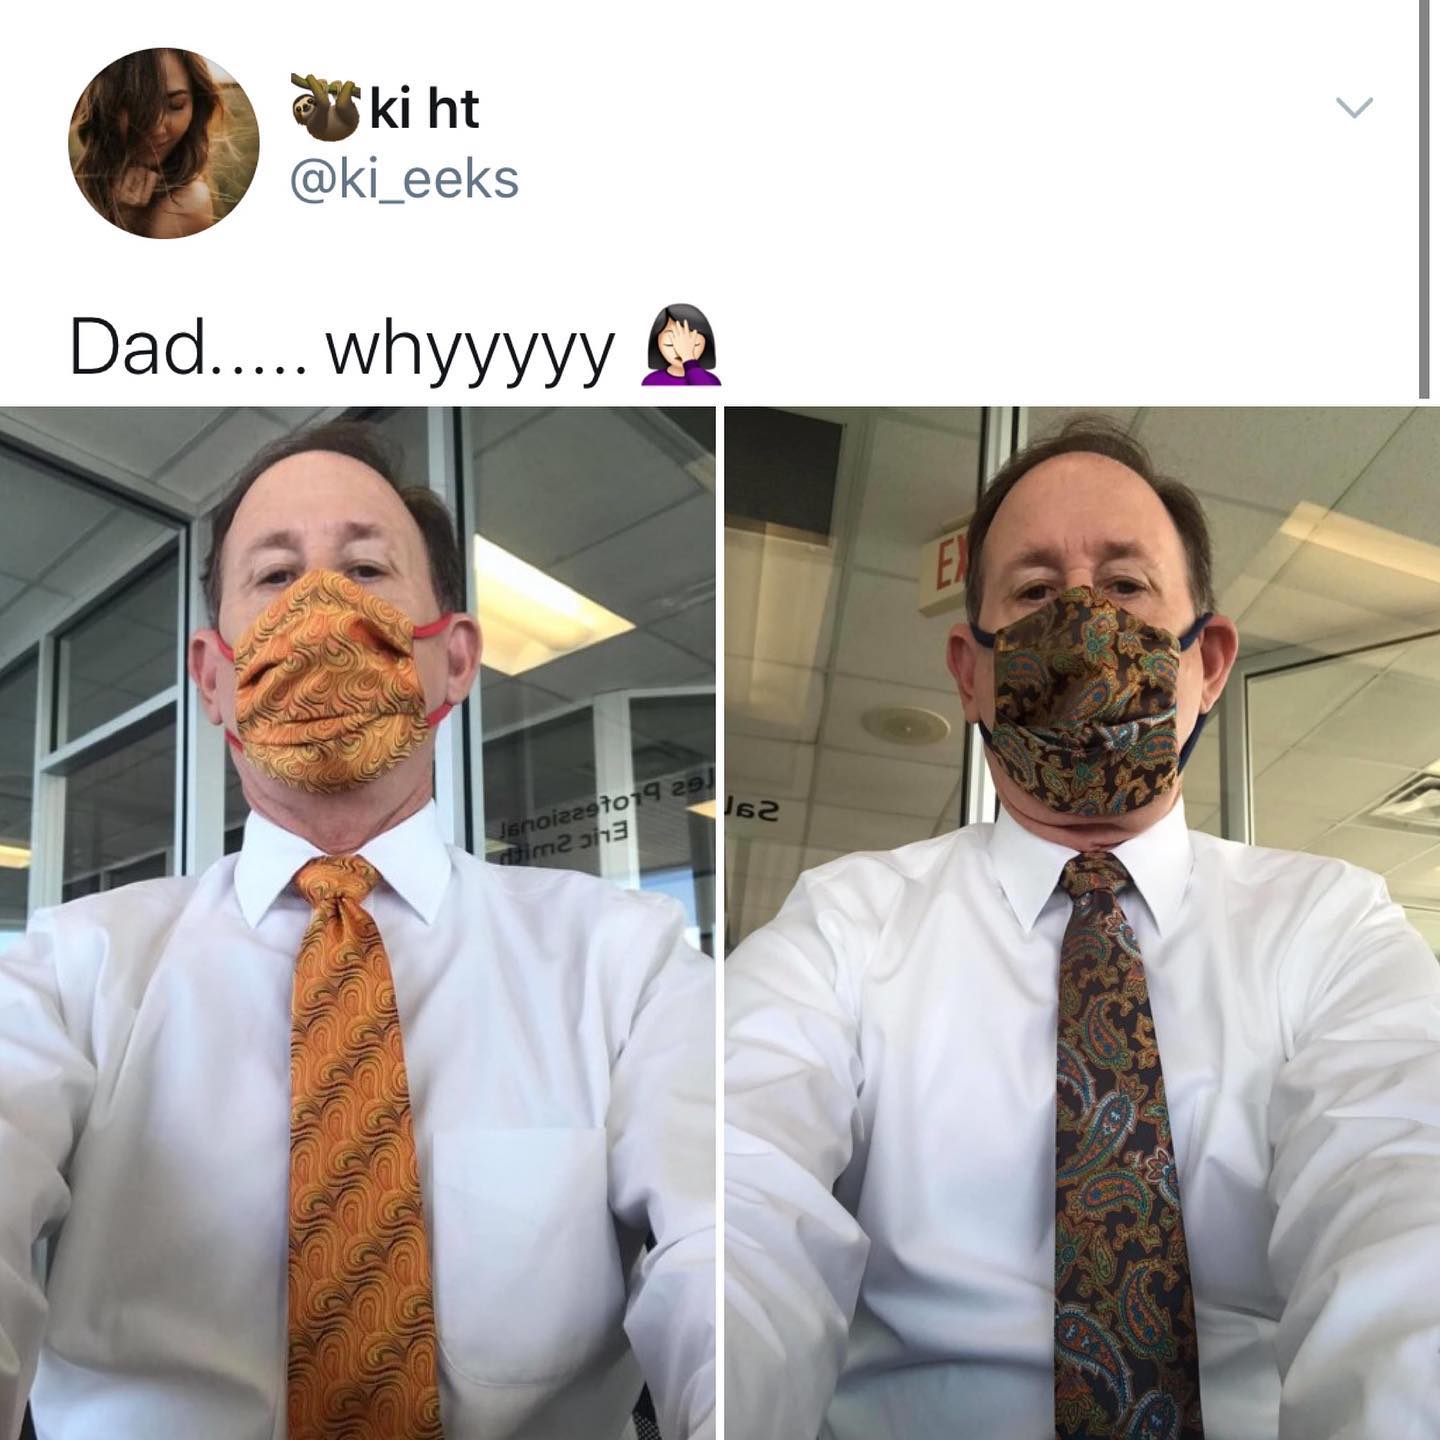 dank memes - twitter - matching tie and mask - ki ht Dad..... whyyyyy E 62 Jsnoizzato19 20 dim2 ans